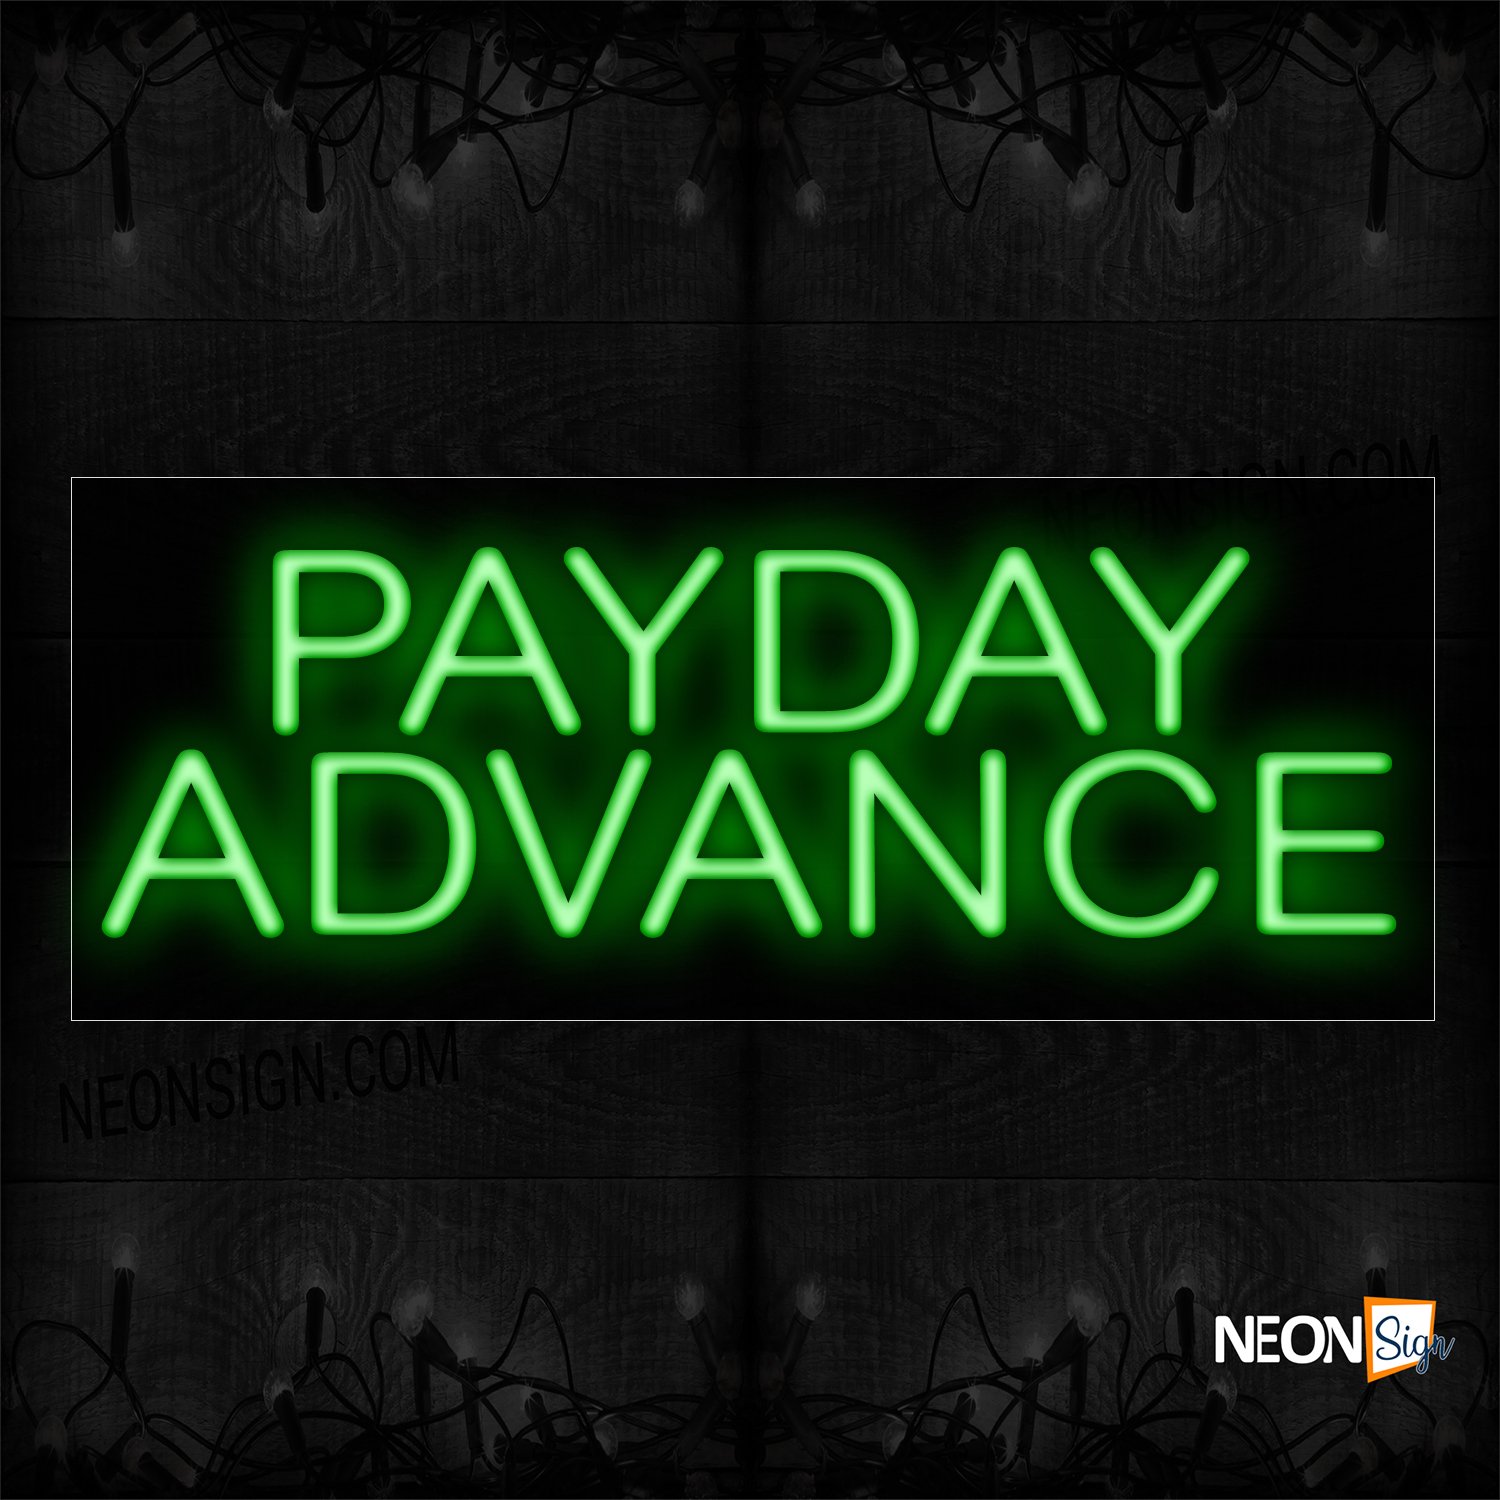 Image of 12126 Payday Advance In Green Neon Sign_13x32 Black Backing